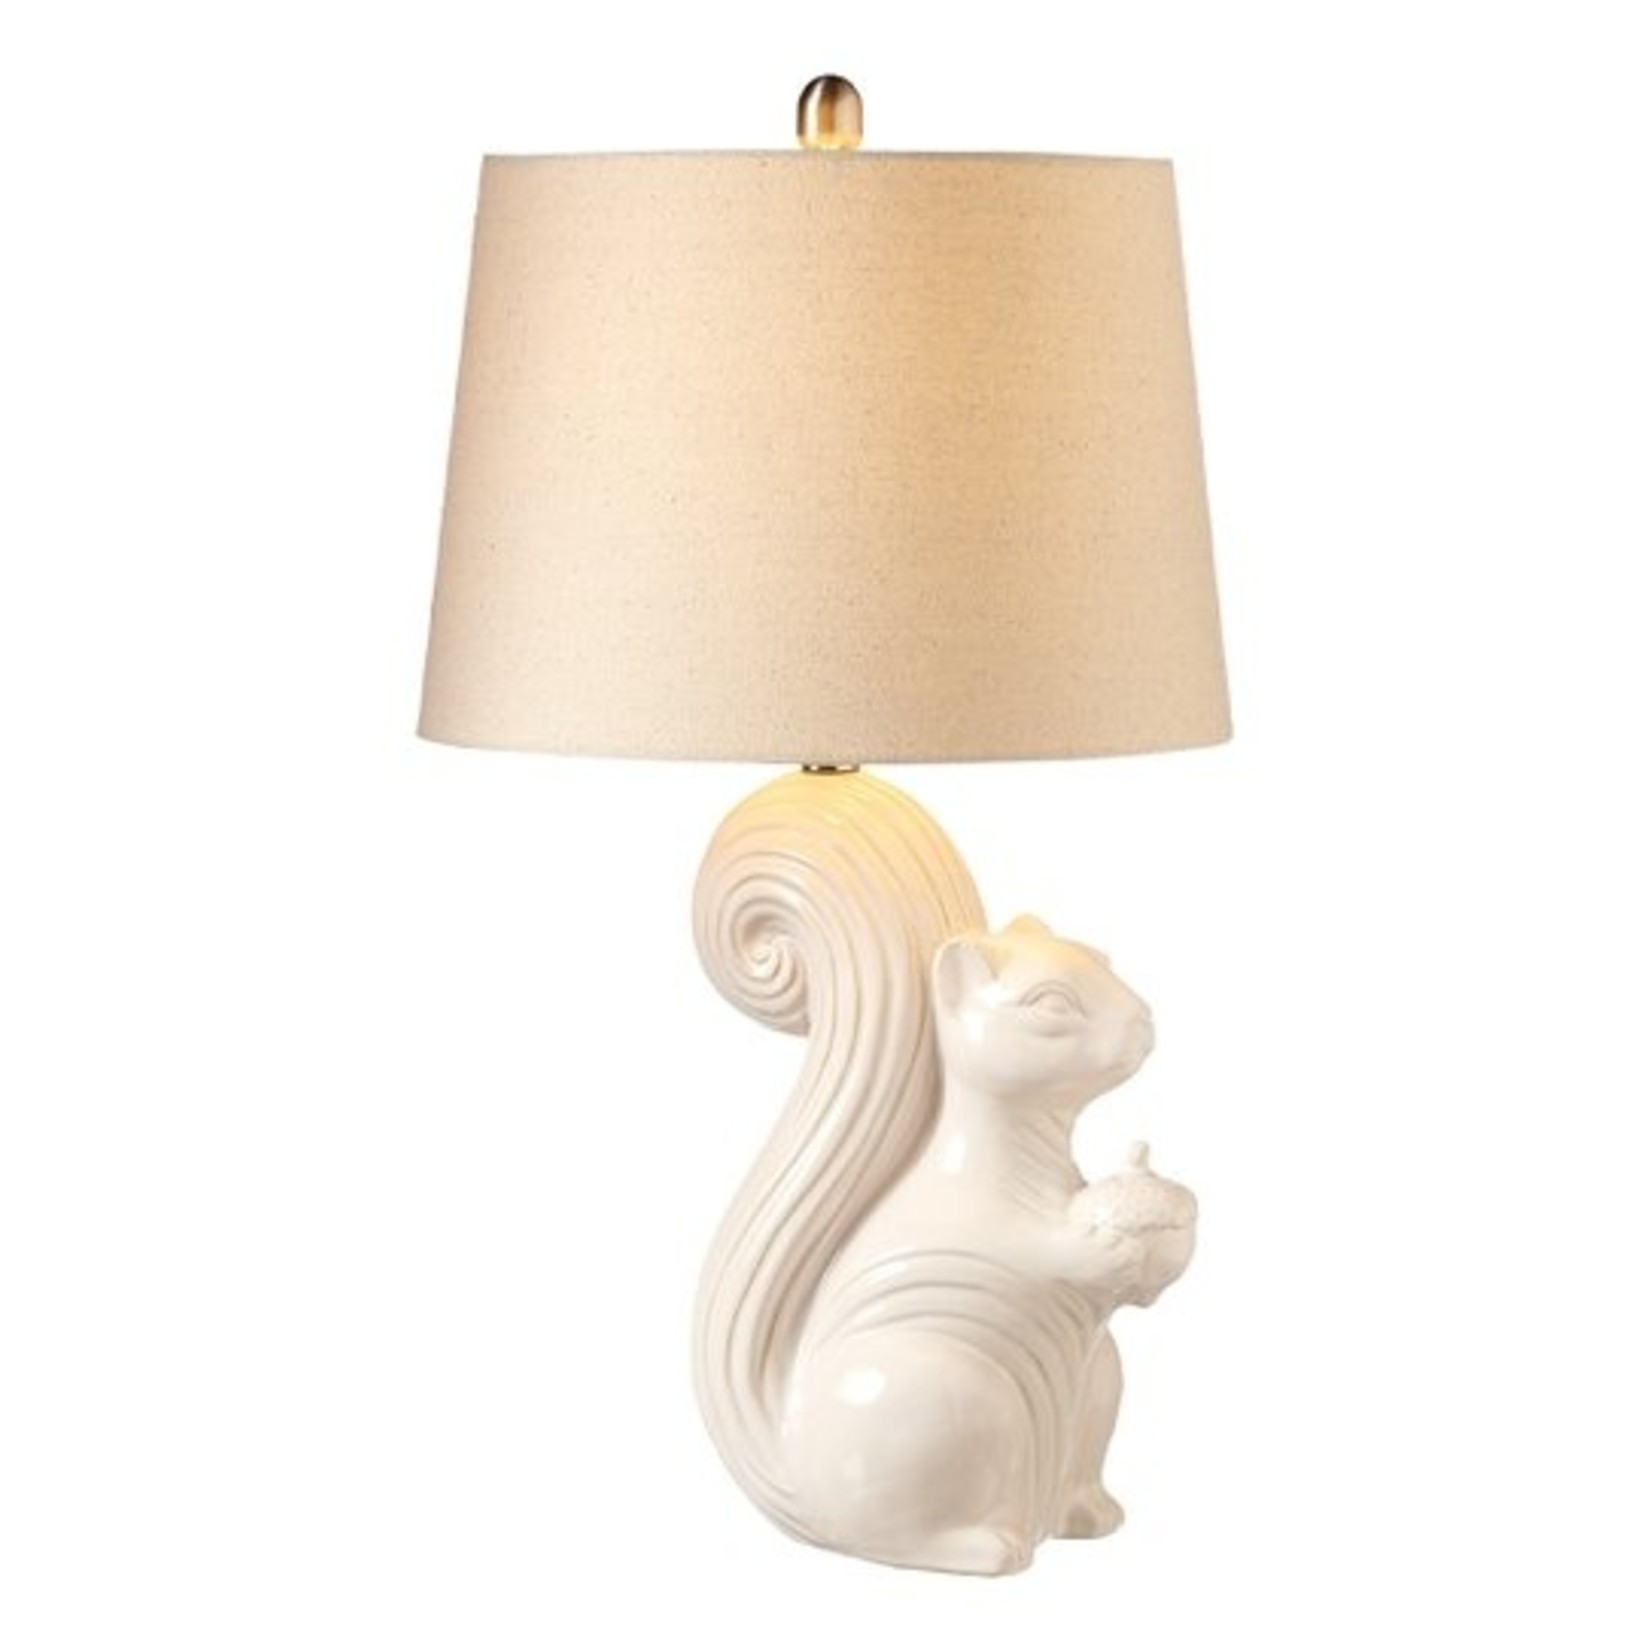 Squirrel Lamp with USB Plug-In